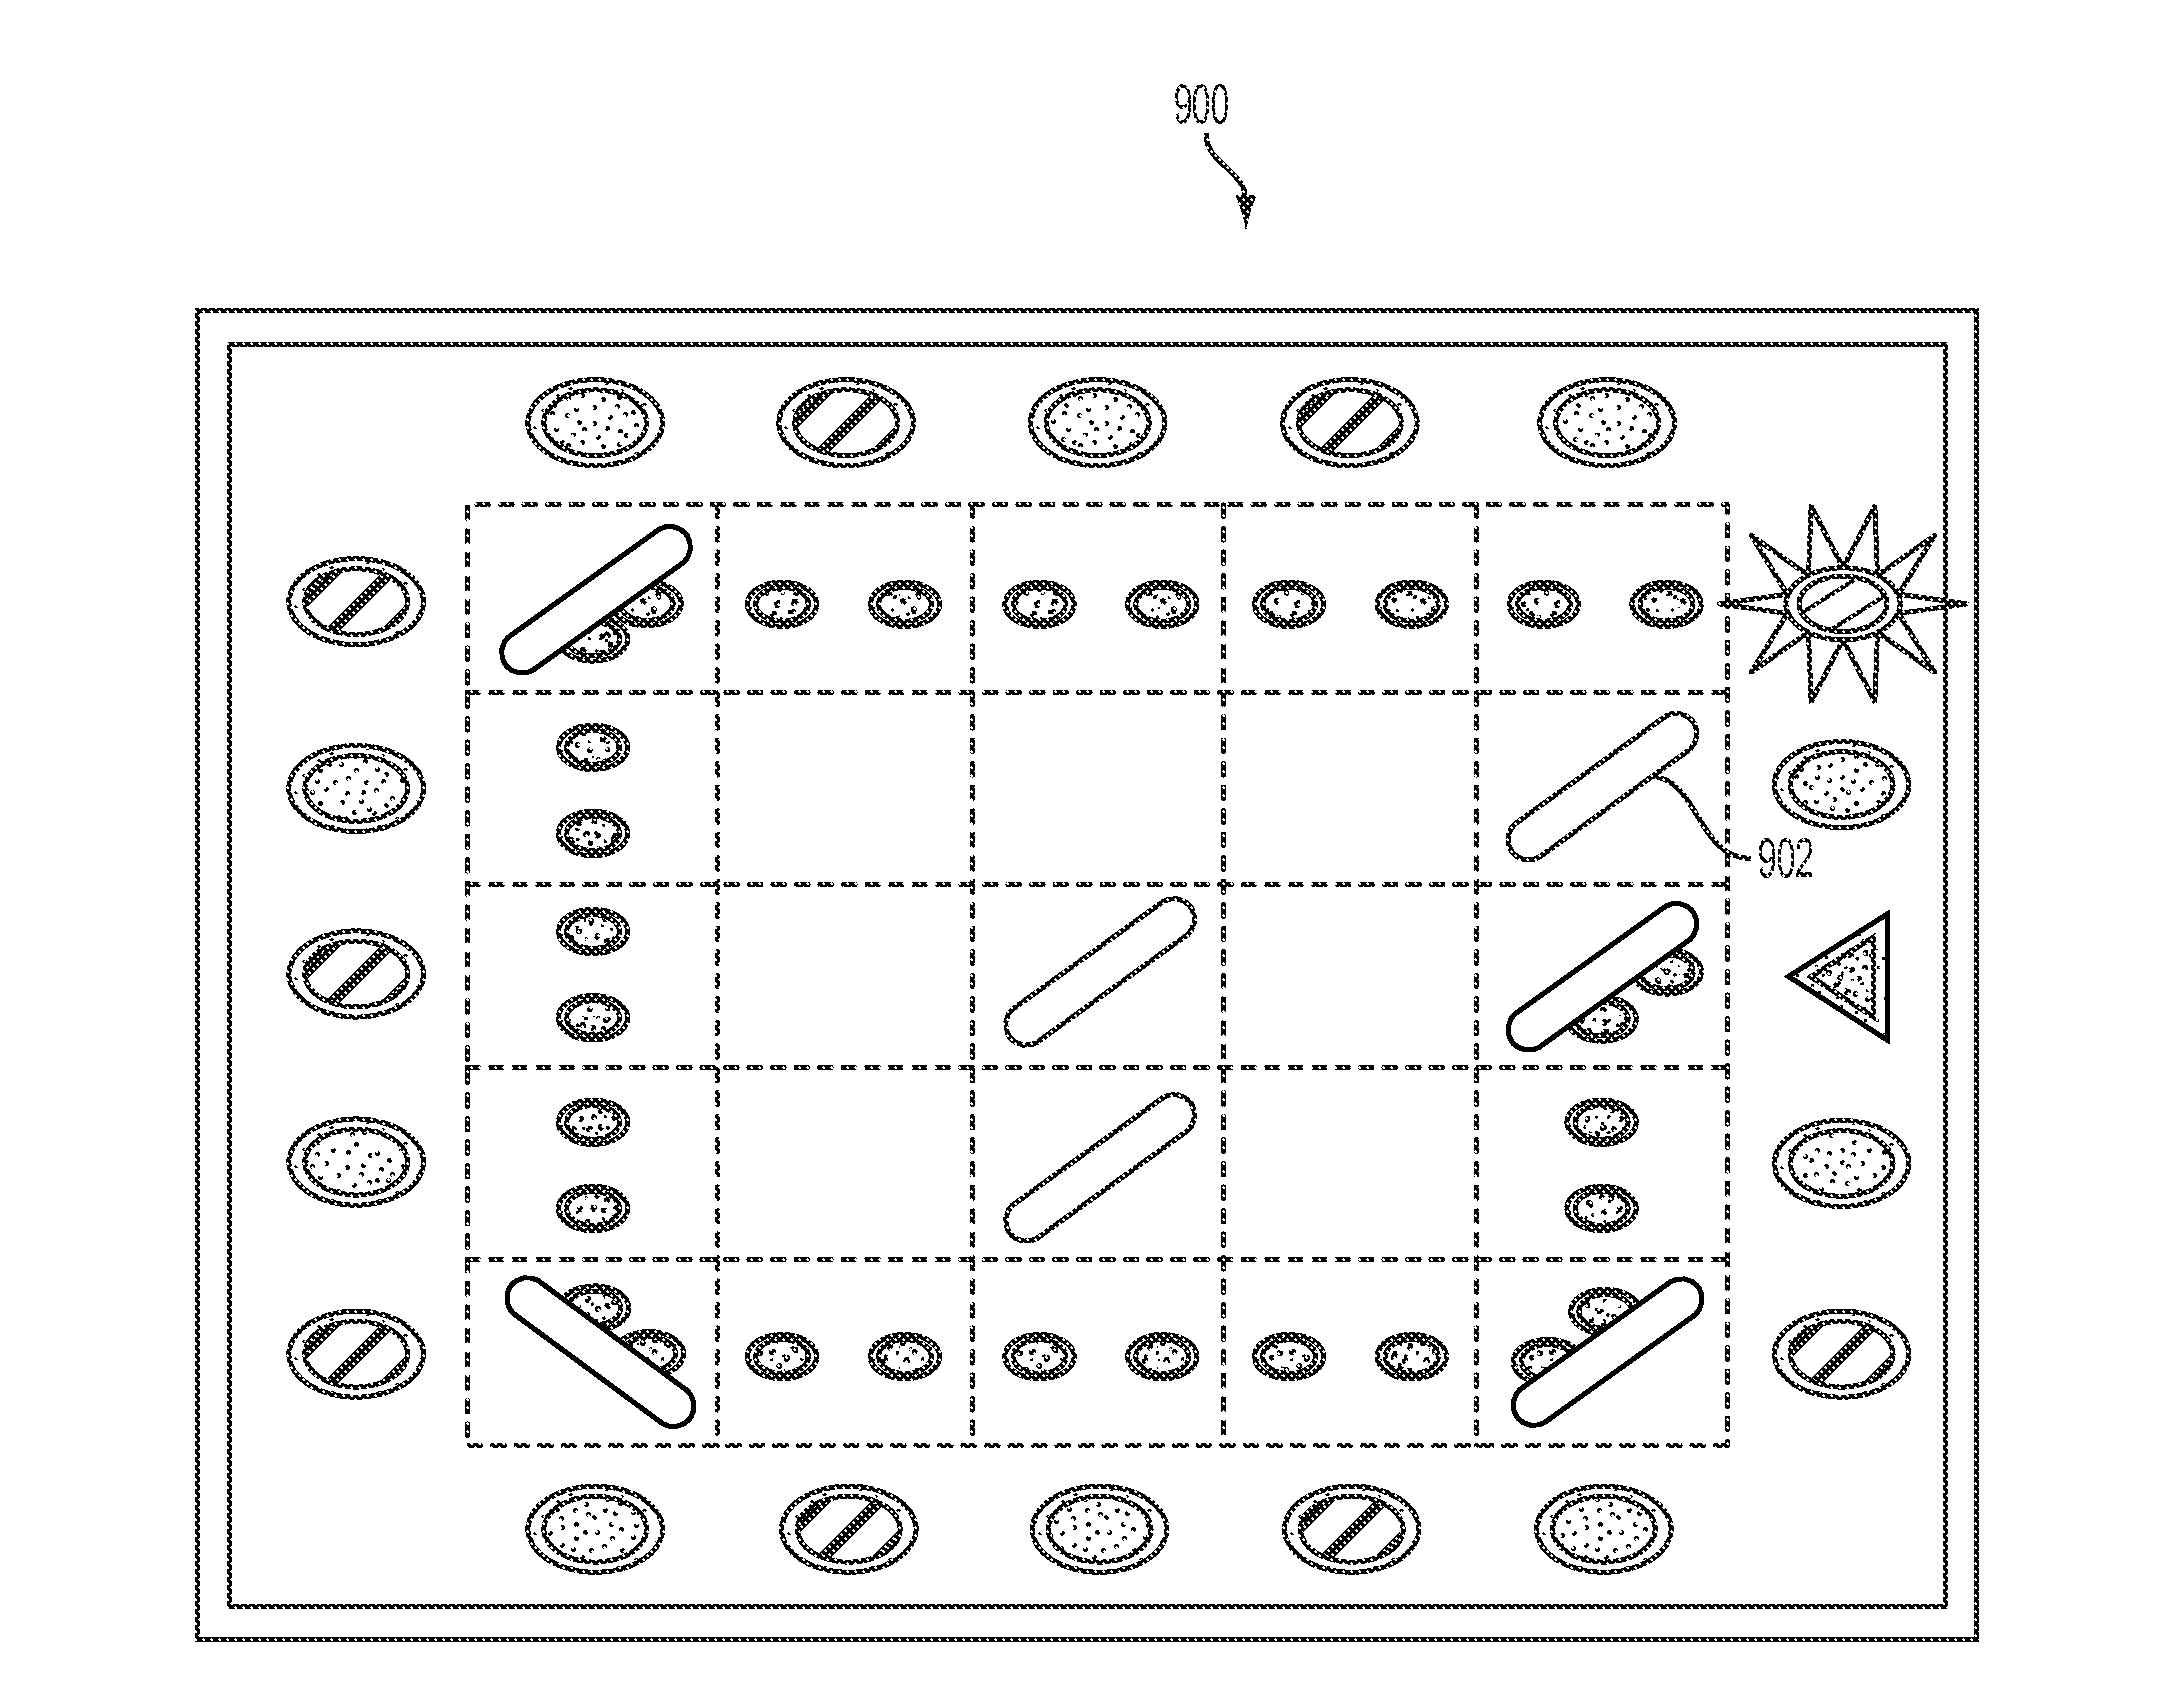 Systems and methods for enhancing cognition